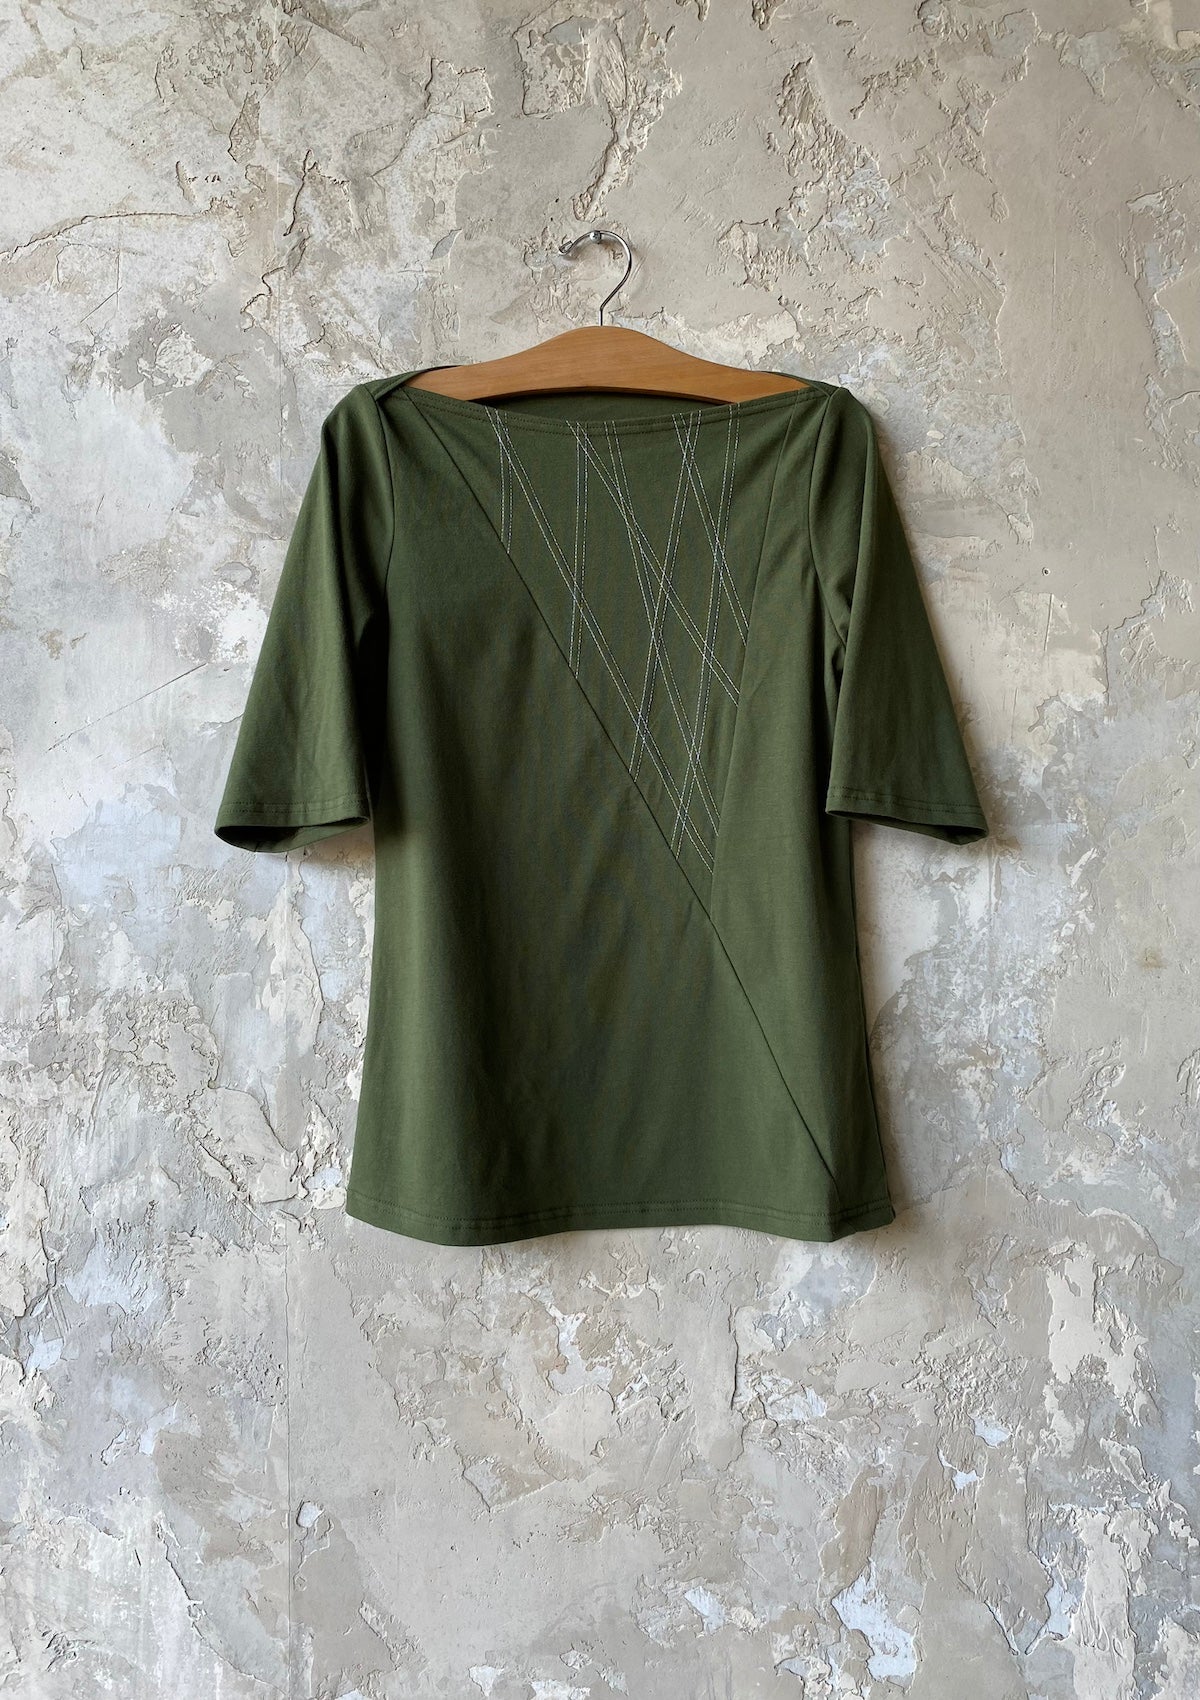 Medium, Triangle Top Mid Sleeve in olive